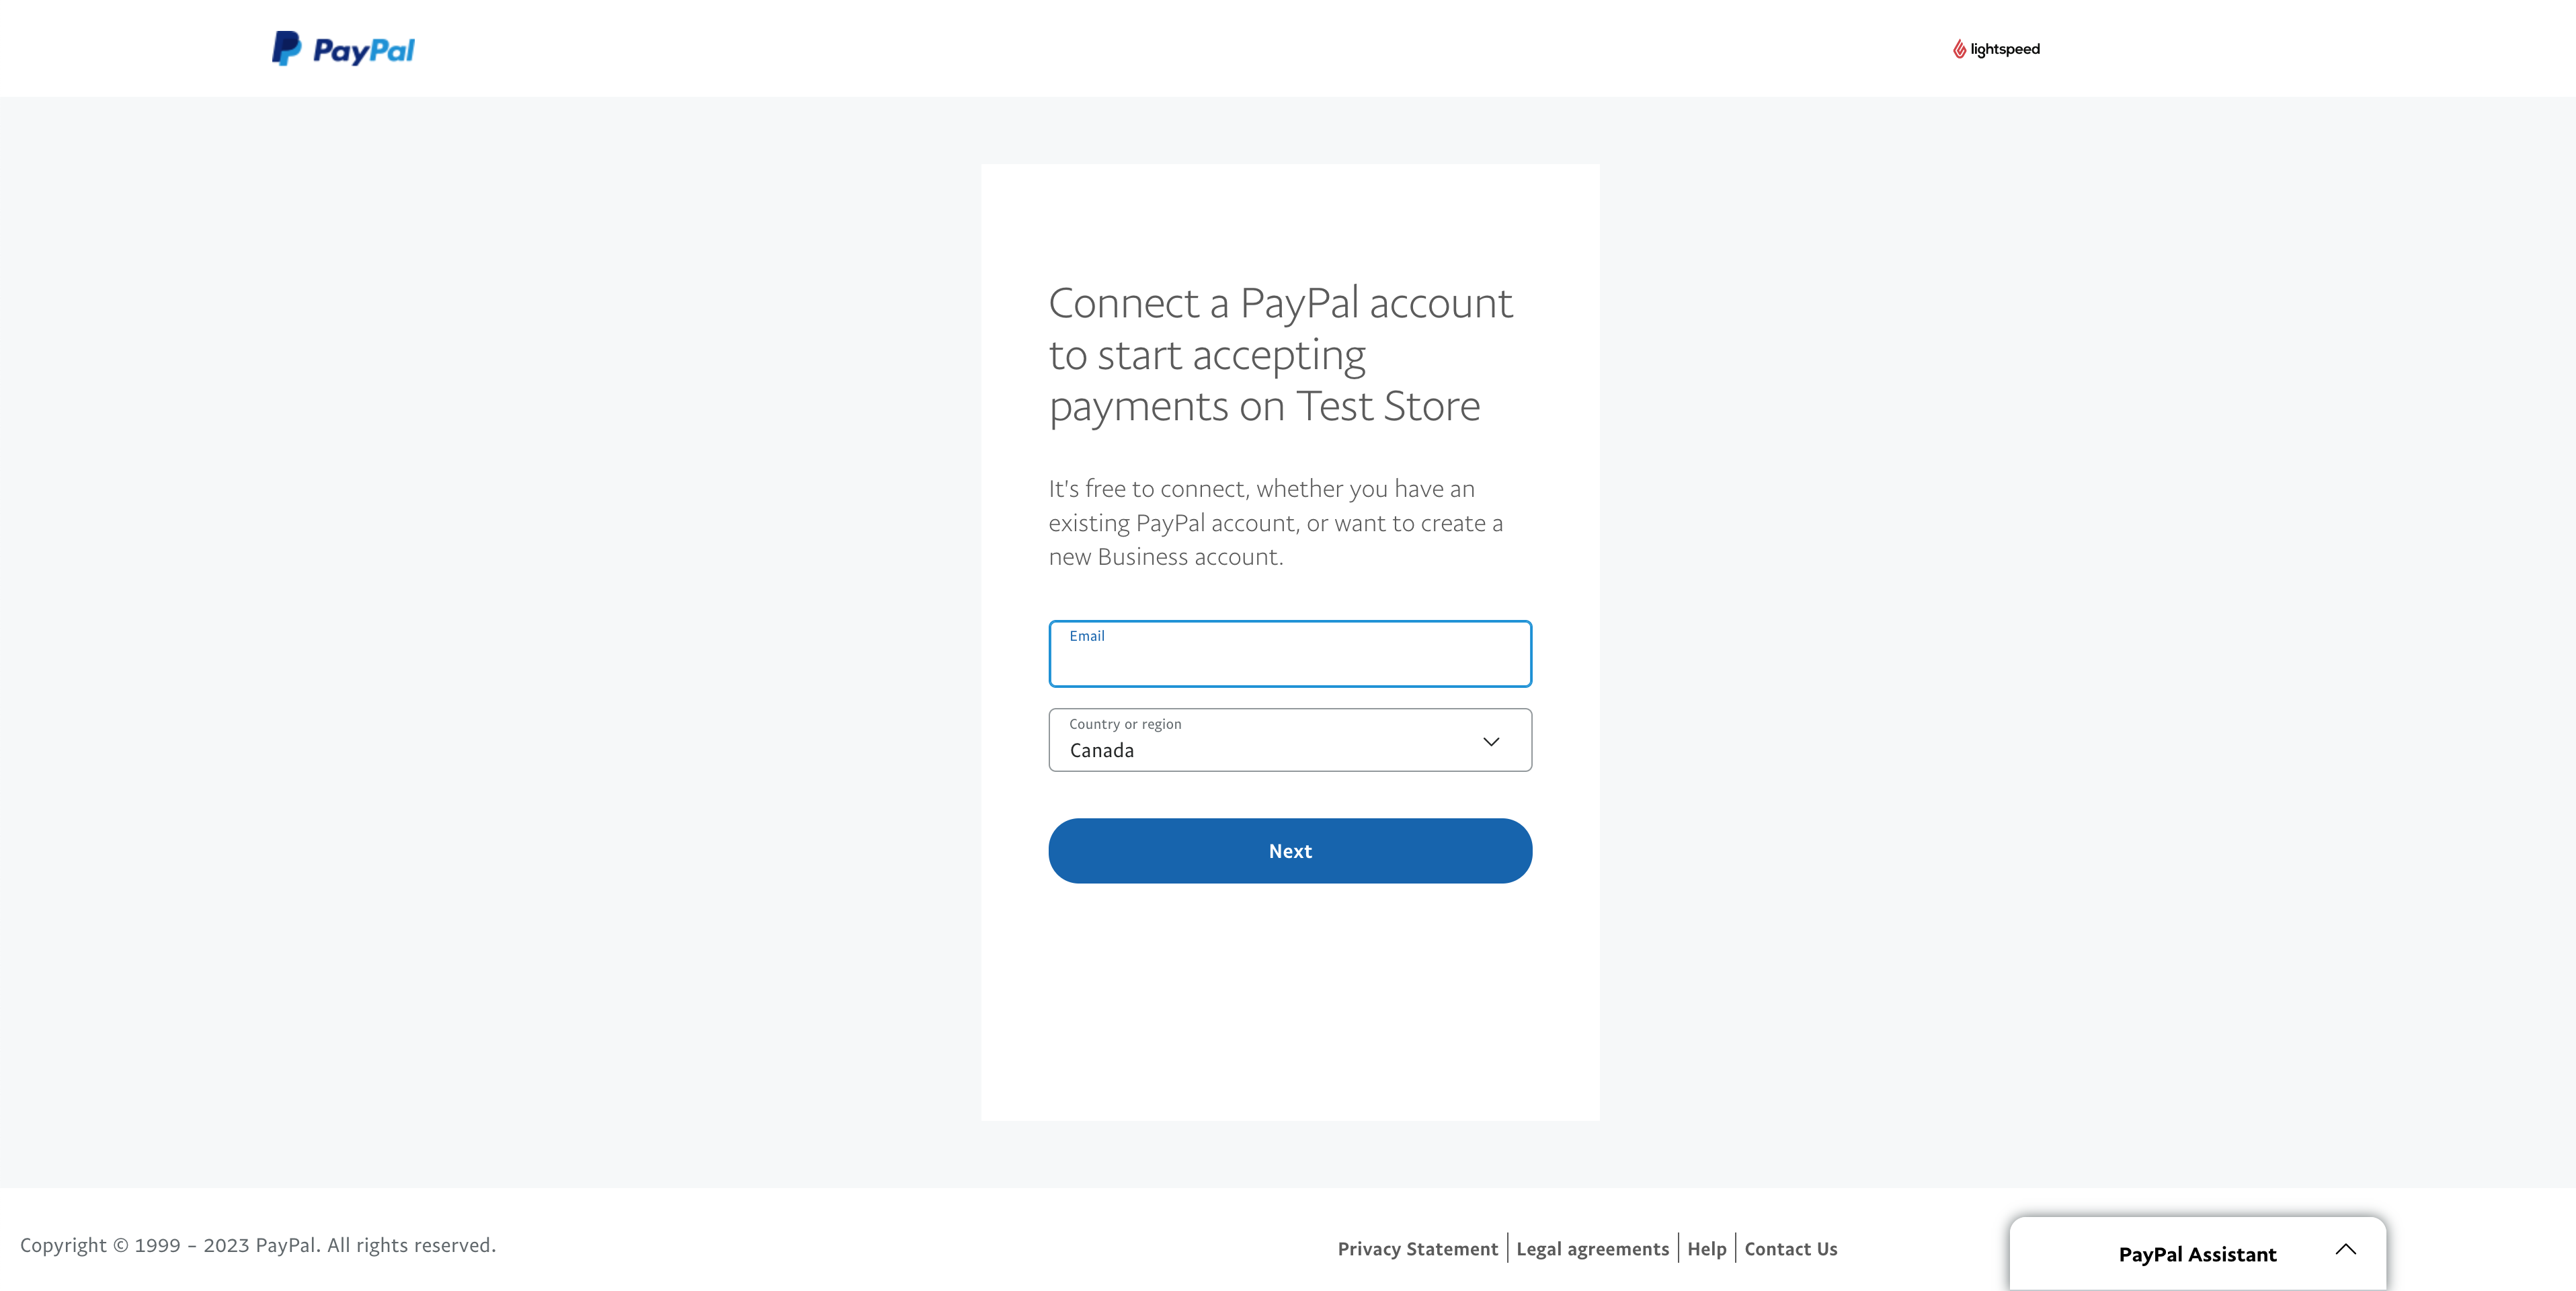 Enter your email for your Paypal acccount